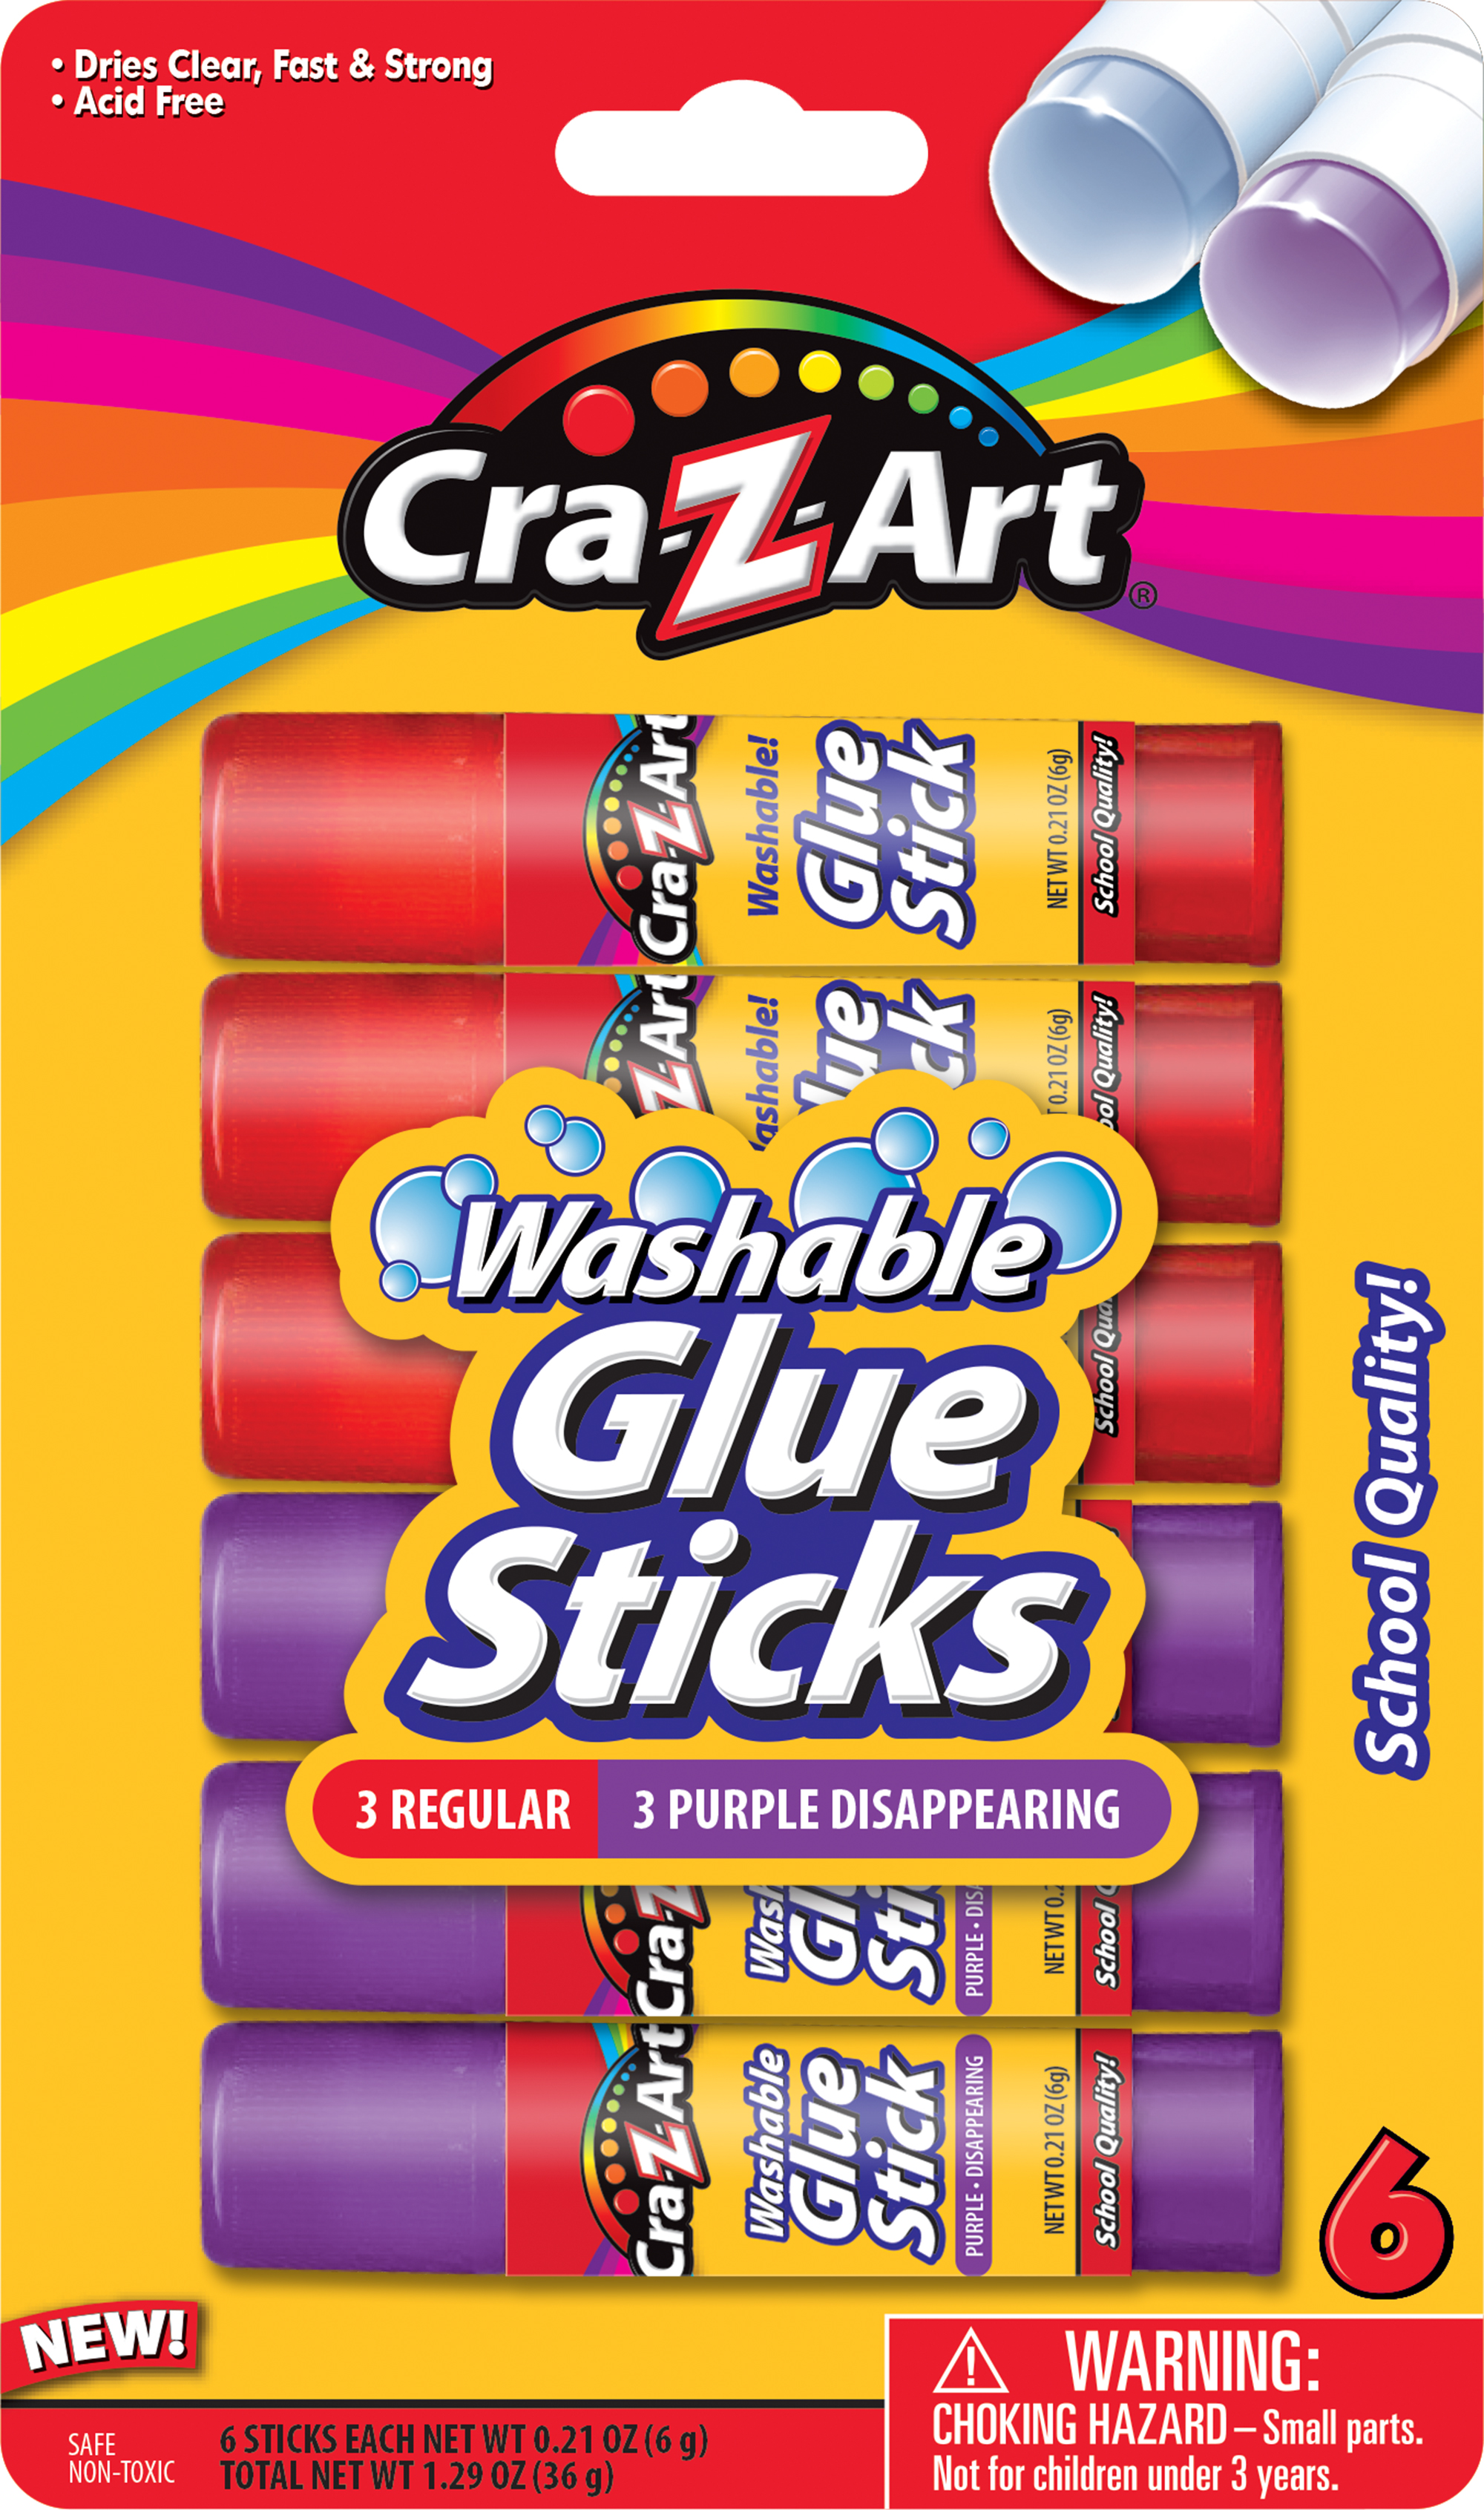 Cra-Z-Art Washable Glue Sticks, Disappearing Purple, 6 Count, Total Weight 1.29oz - image 1 of 9